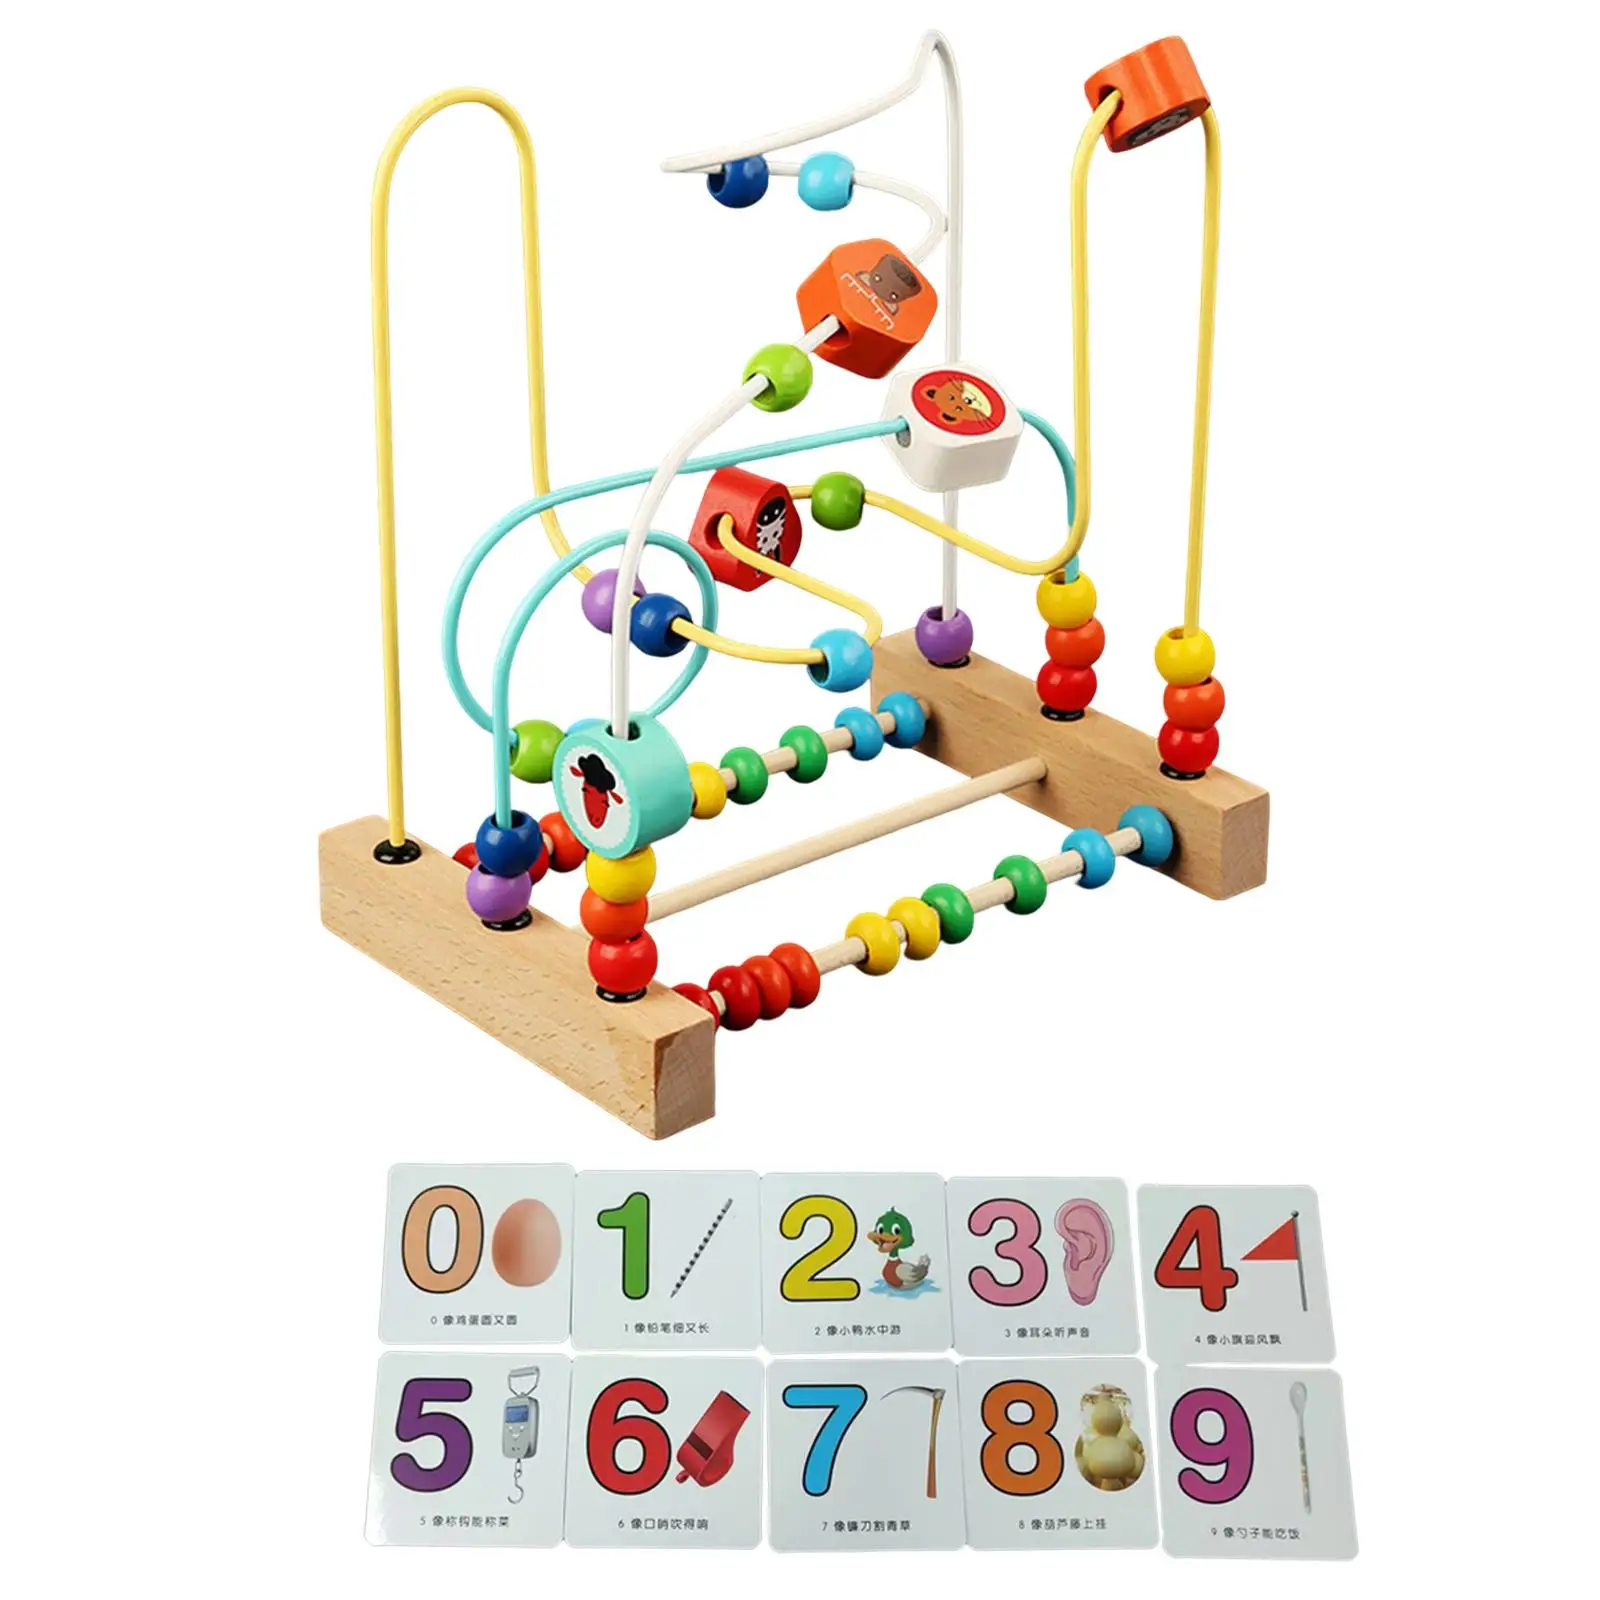 Bead Maze Roller Coaster Circle Toy Fine Motor Skill Activity Toy for Infant